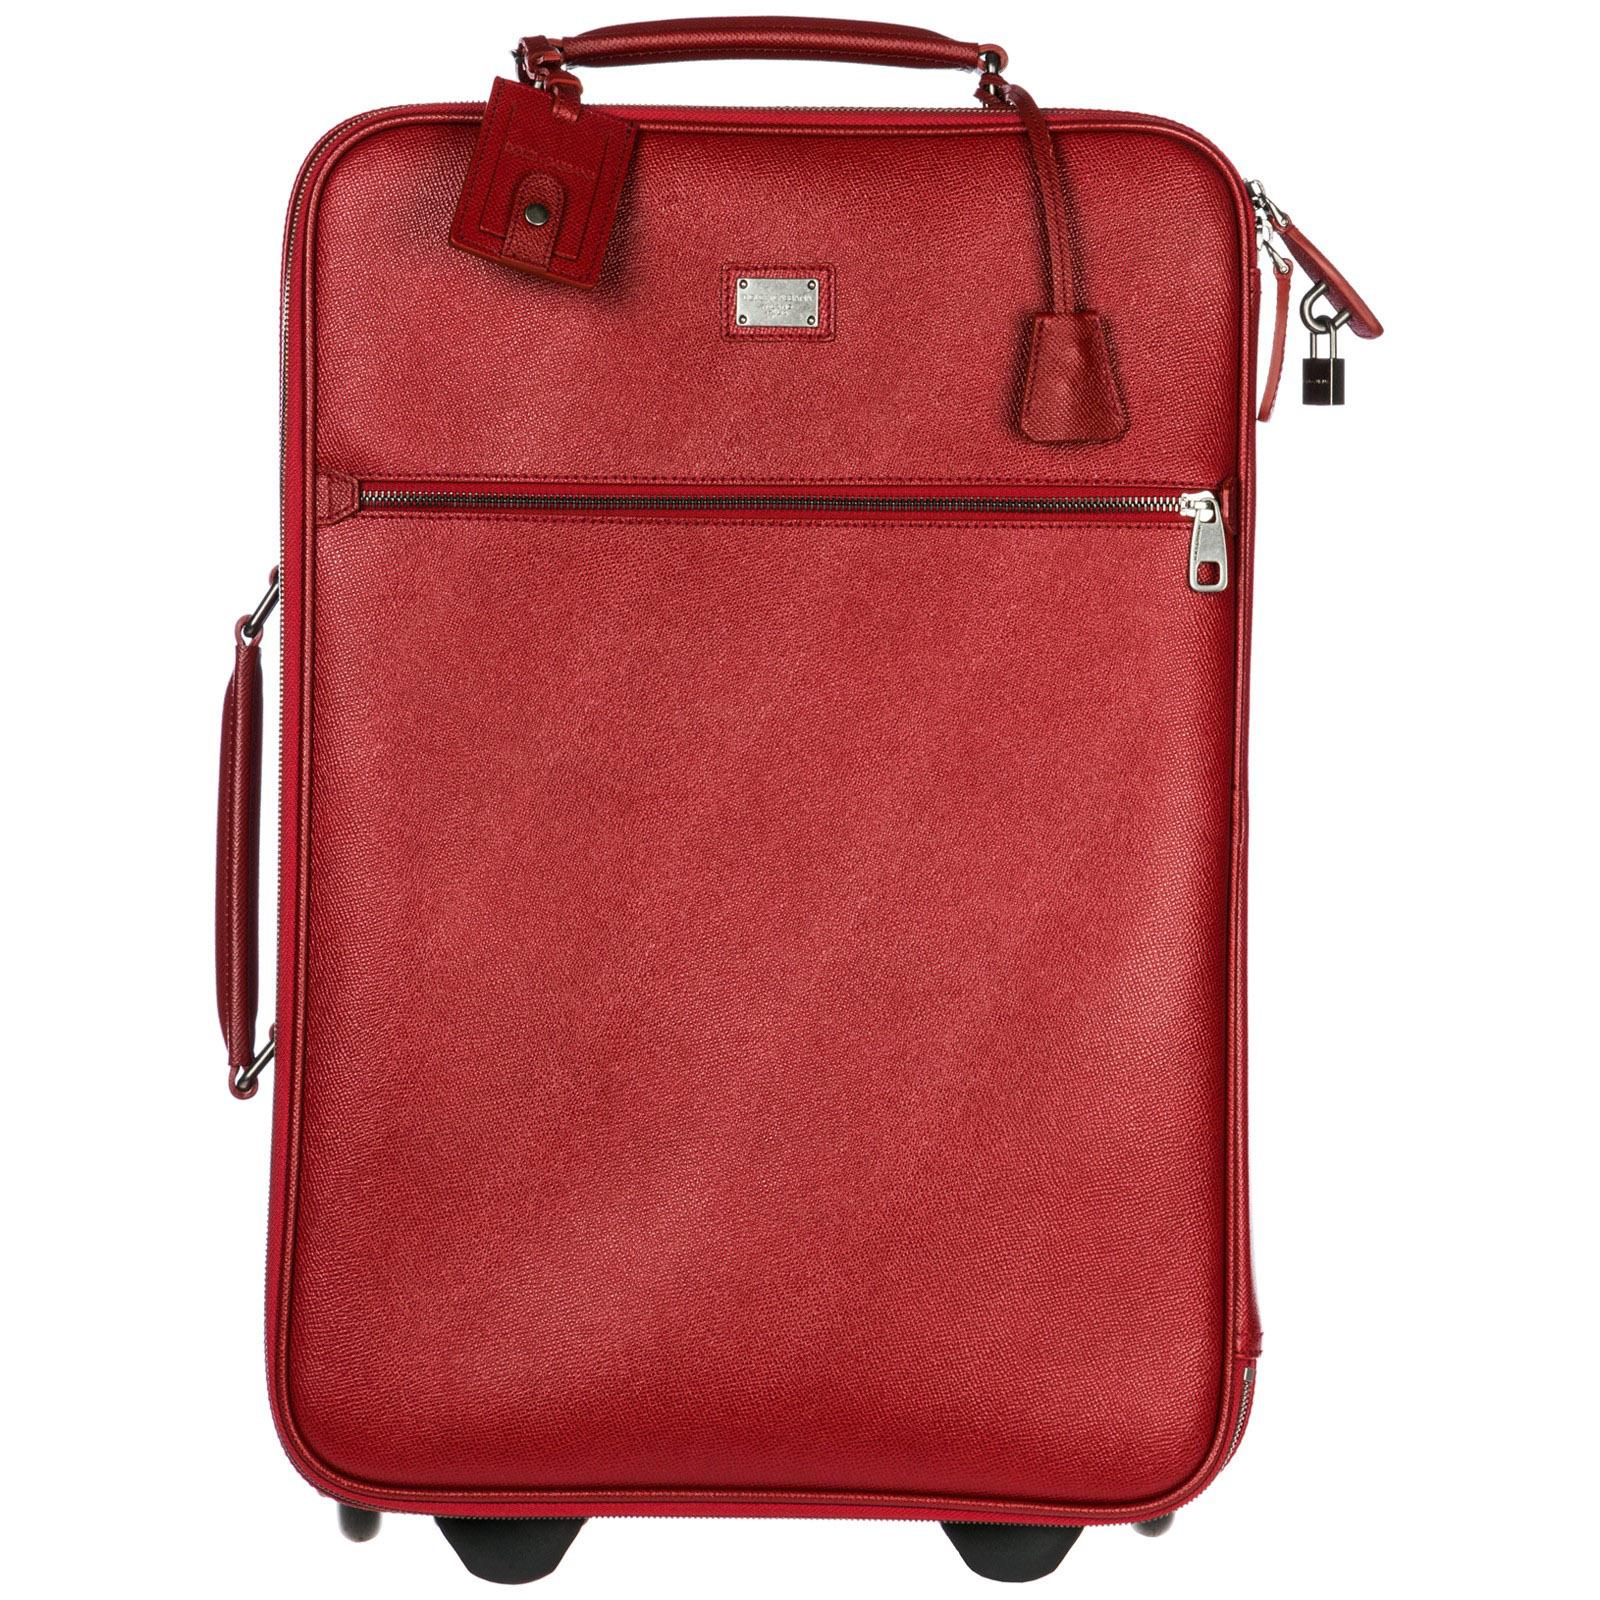 Dolce Gabbana Trolley Leather, Red Leather Suitcase